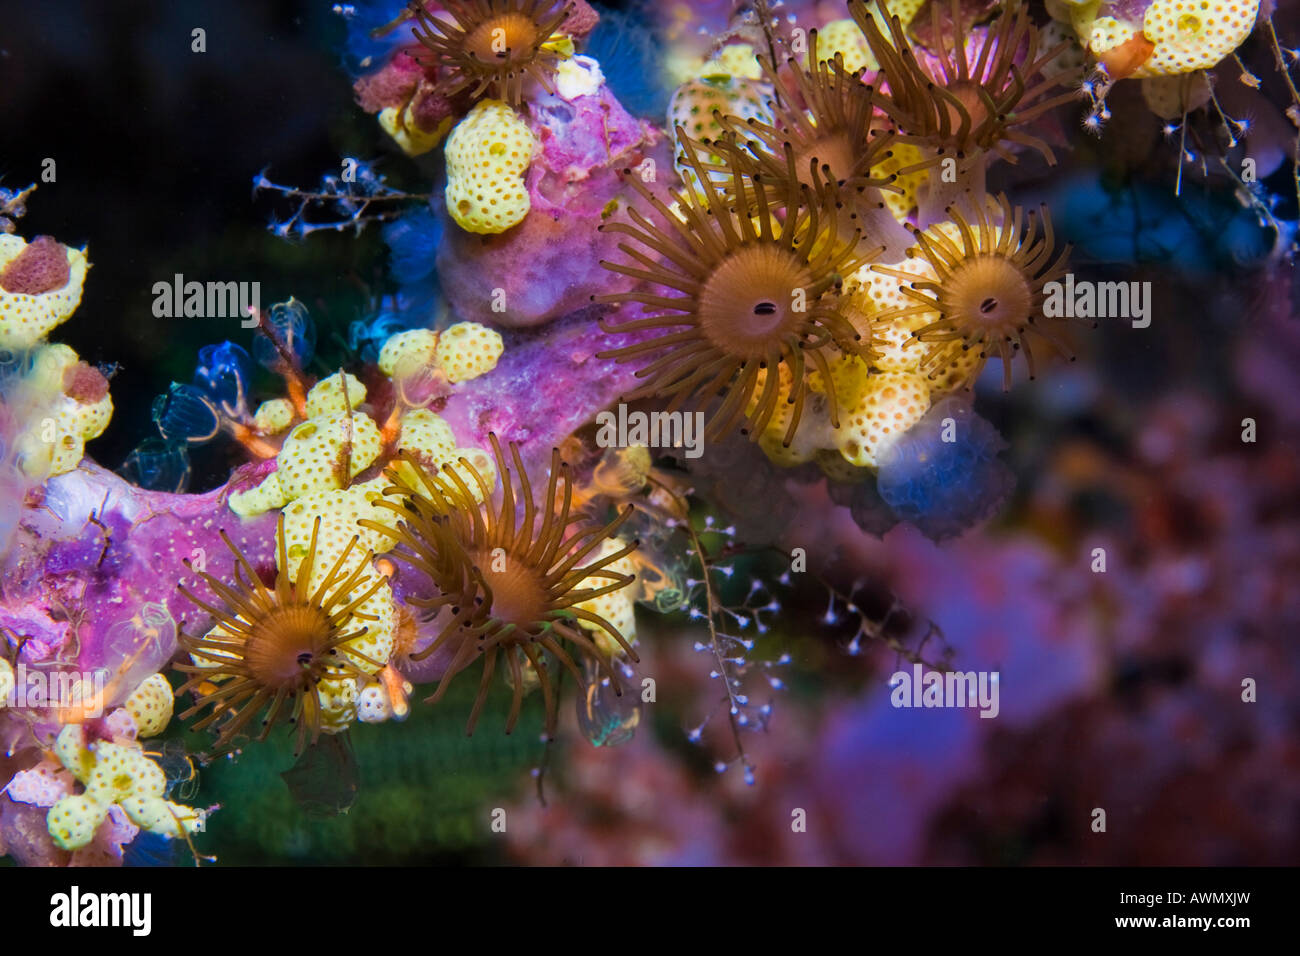 Encrusting Stick Anemones (Acrozoanthus) and Seasquirts, Indonesia, Asia Stock Photo